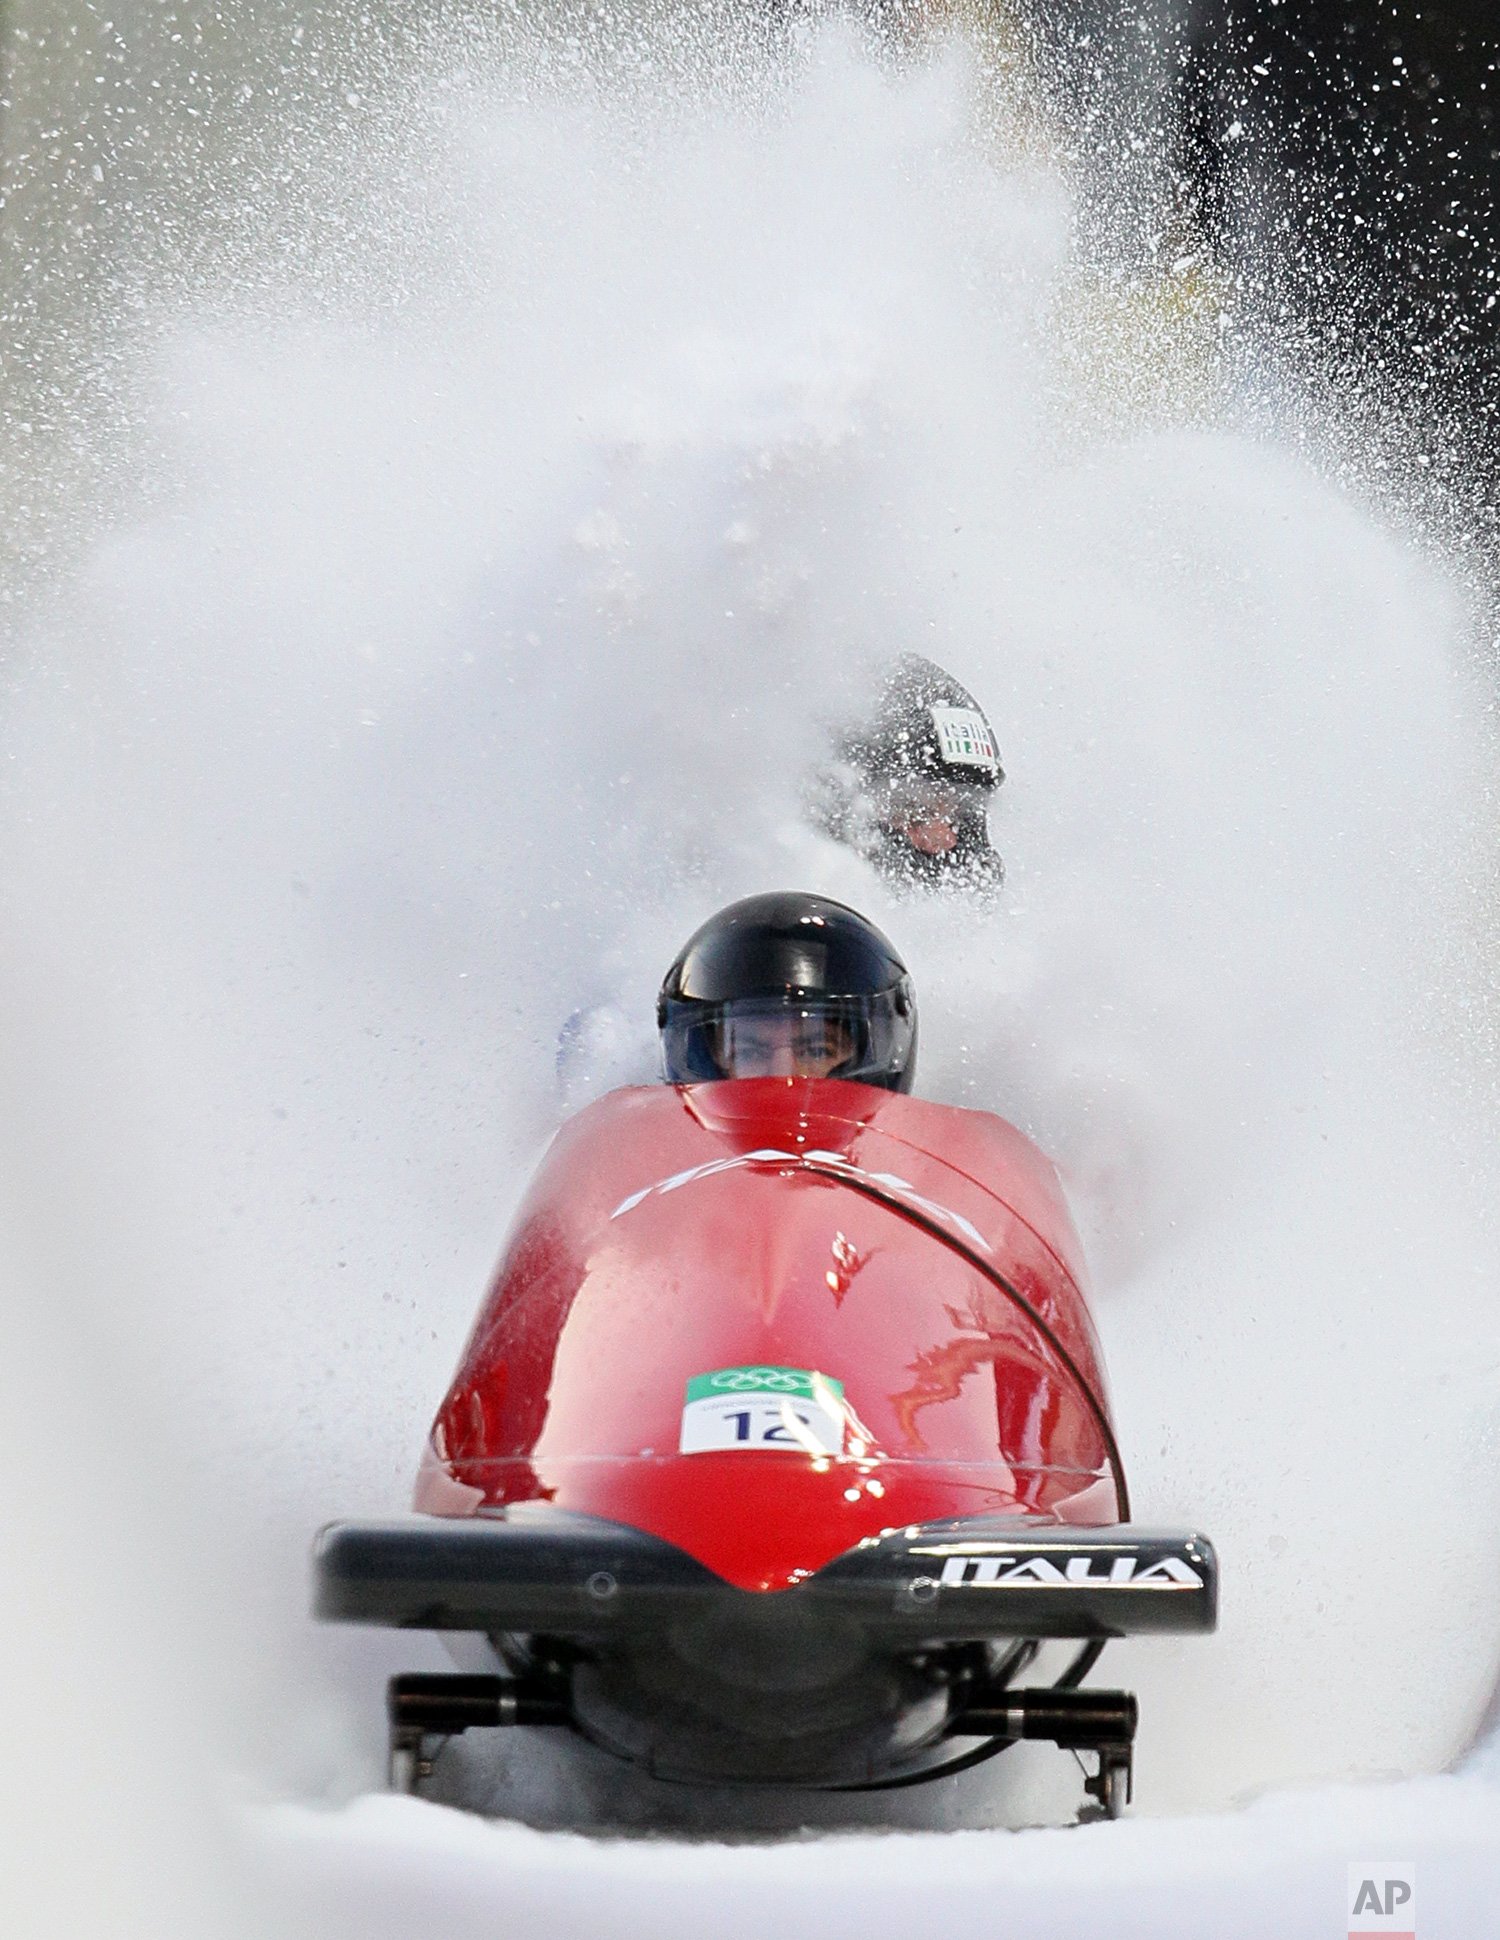  Italy's ITA-1, piloted by Simone Bertazzo with brakeman Samuele Romanini, brakes in the finish area during the men's two-man bobsled competition at the Vancouver 2010 Olympics in Whistler, British Columbia, on Feb. 20, 2010. (AP Photo/Ricardo Mazala